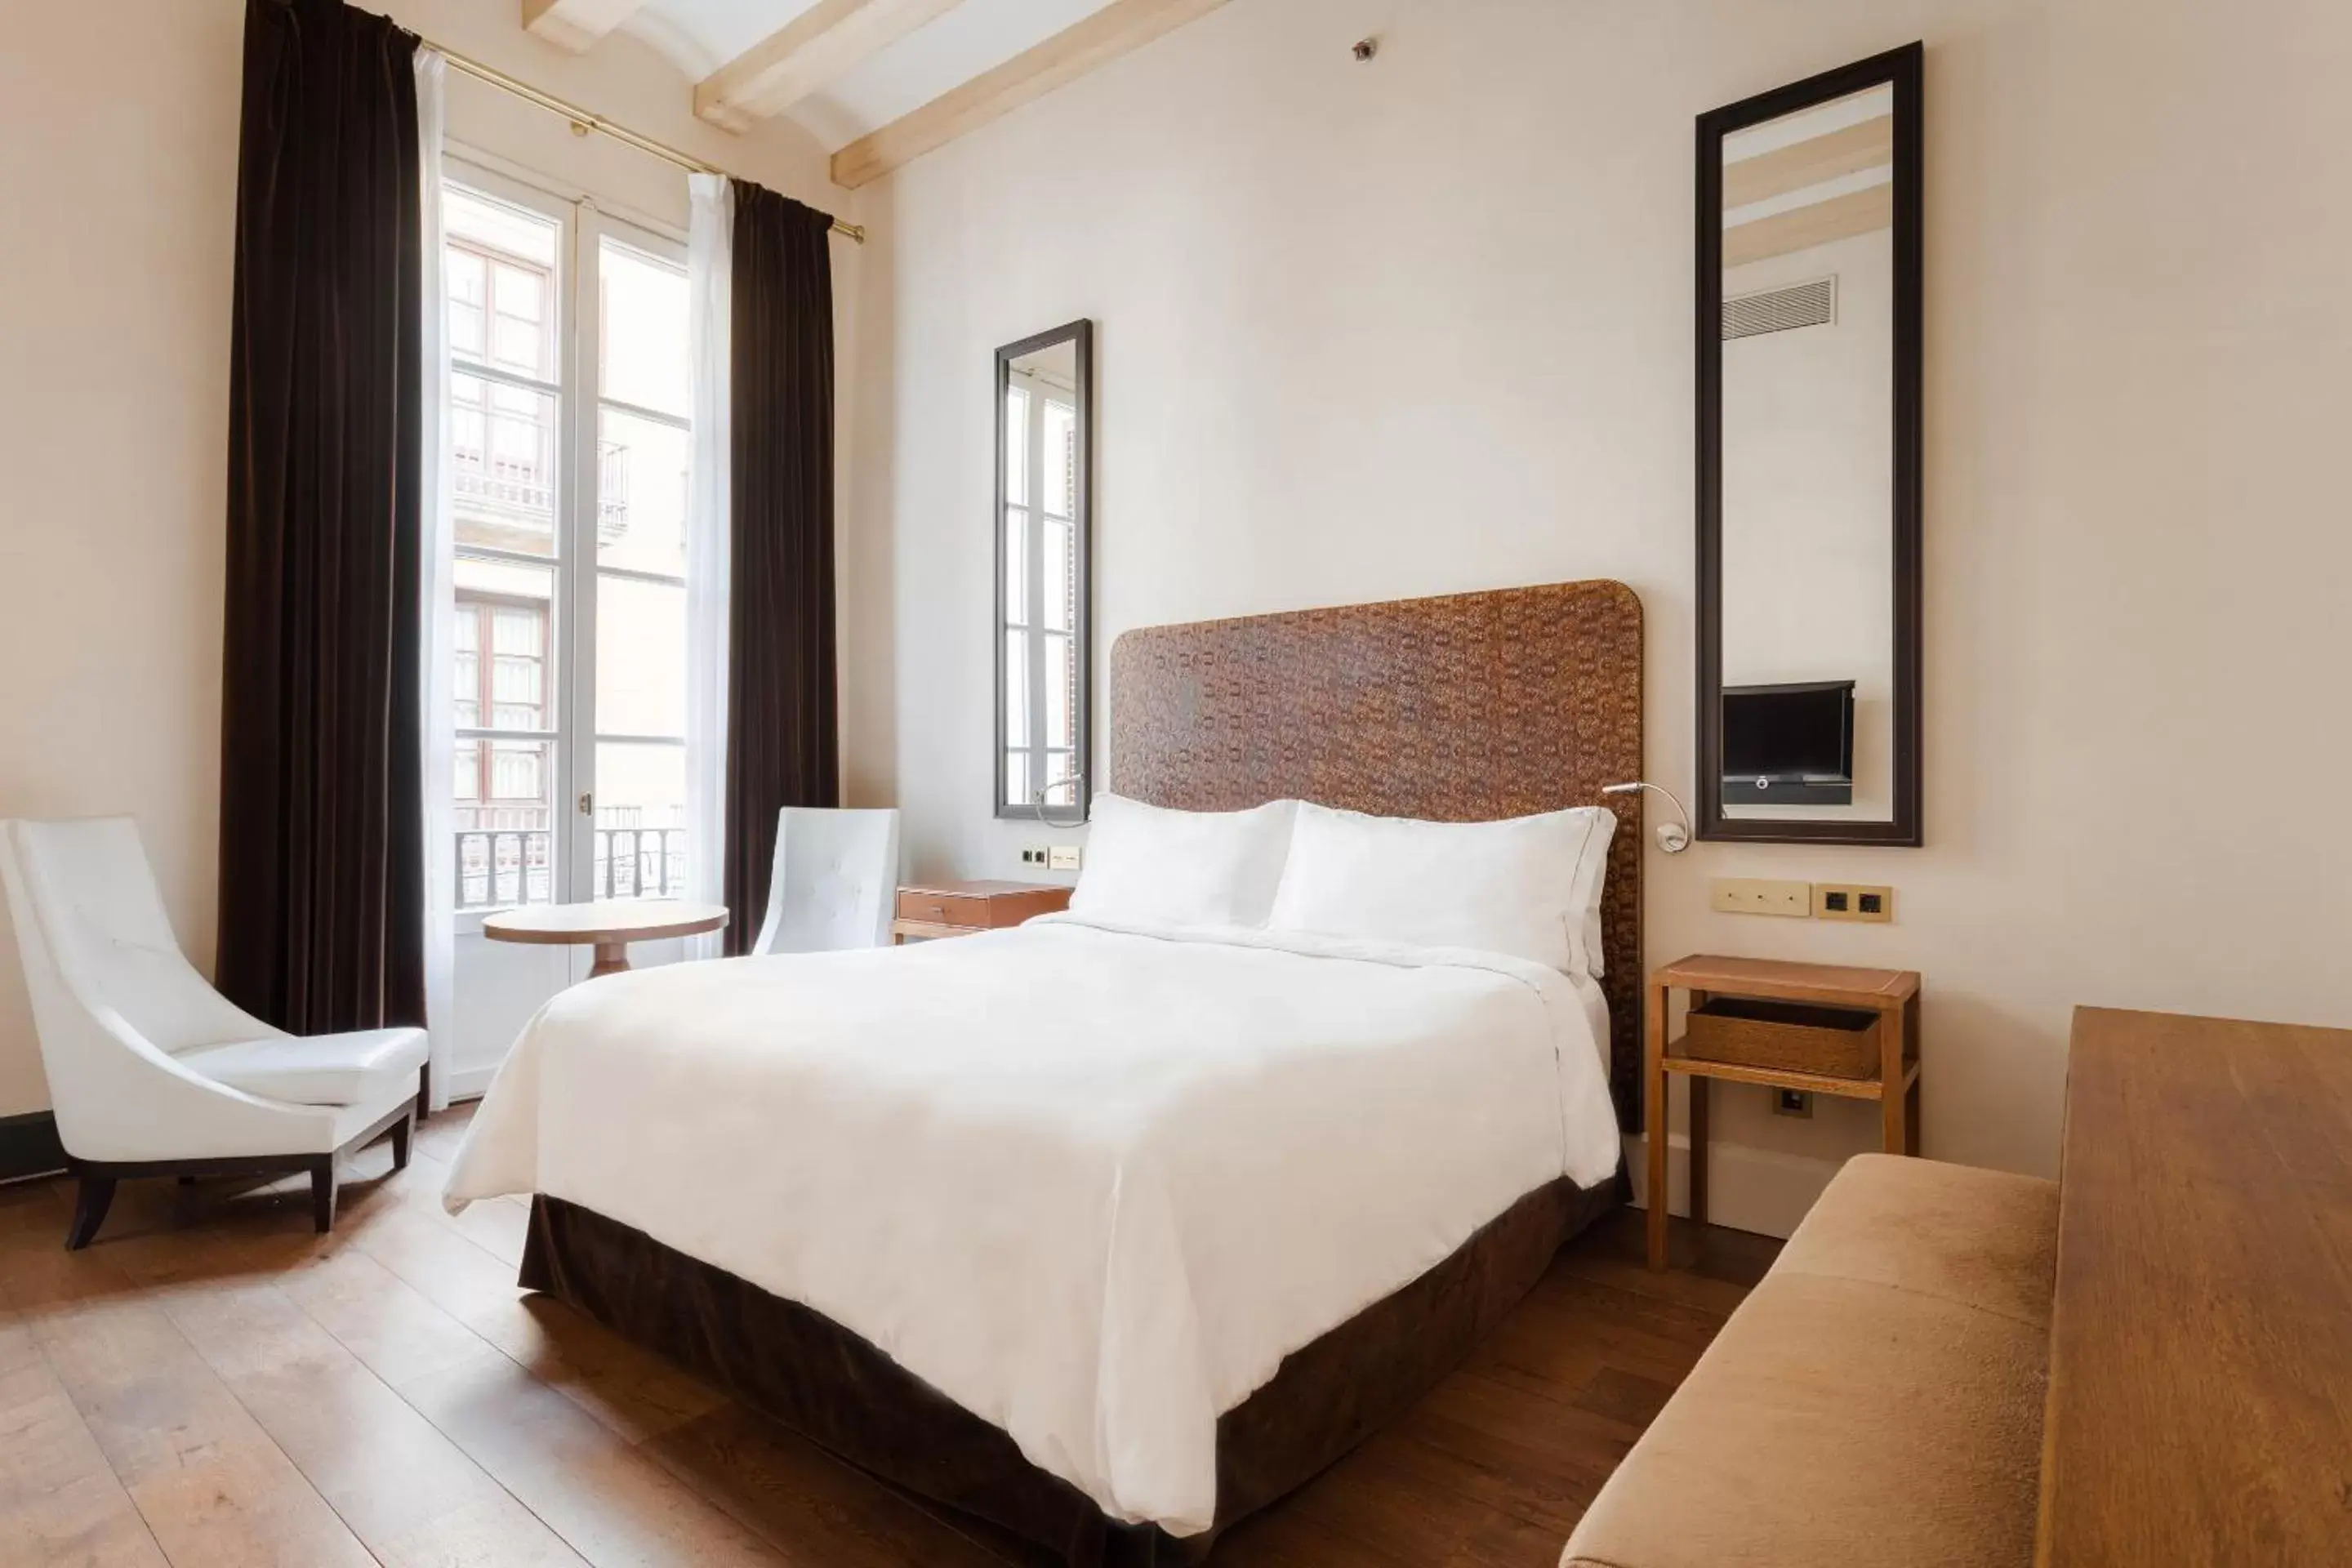 King Room with Balcony in DO Plaça Reial powered by Sonder